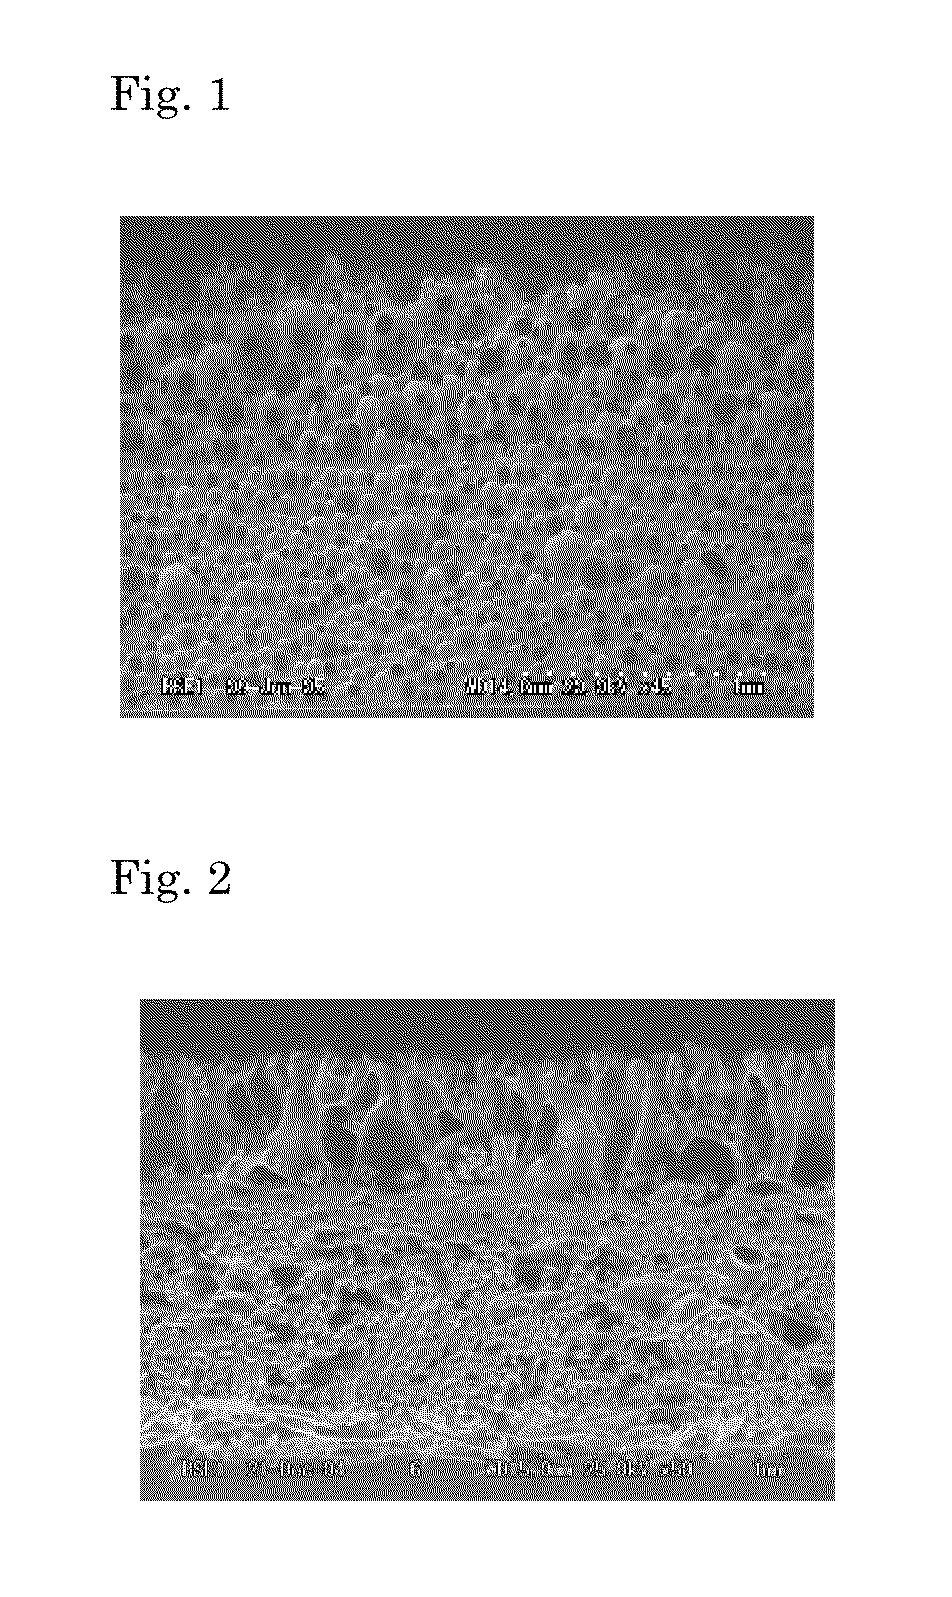 Method for manufacturing a polishing pad